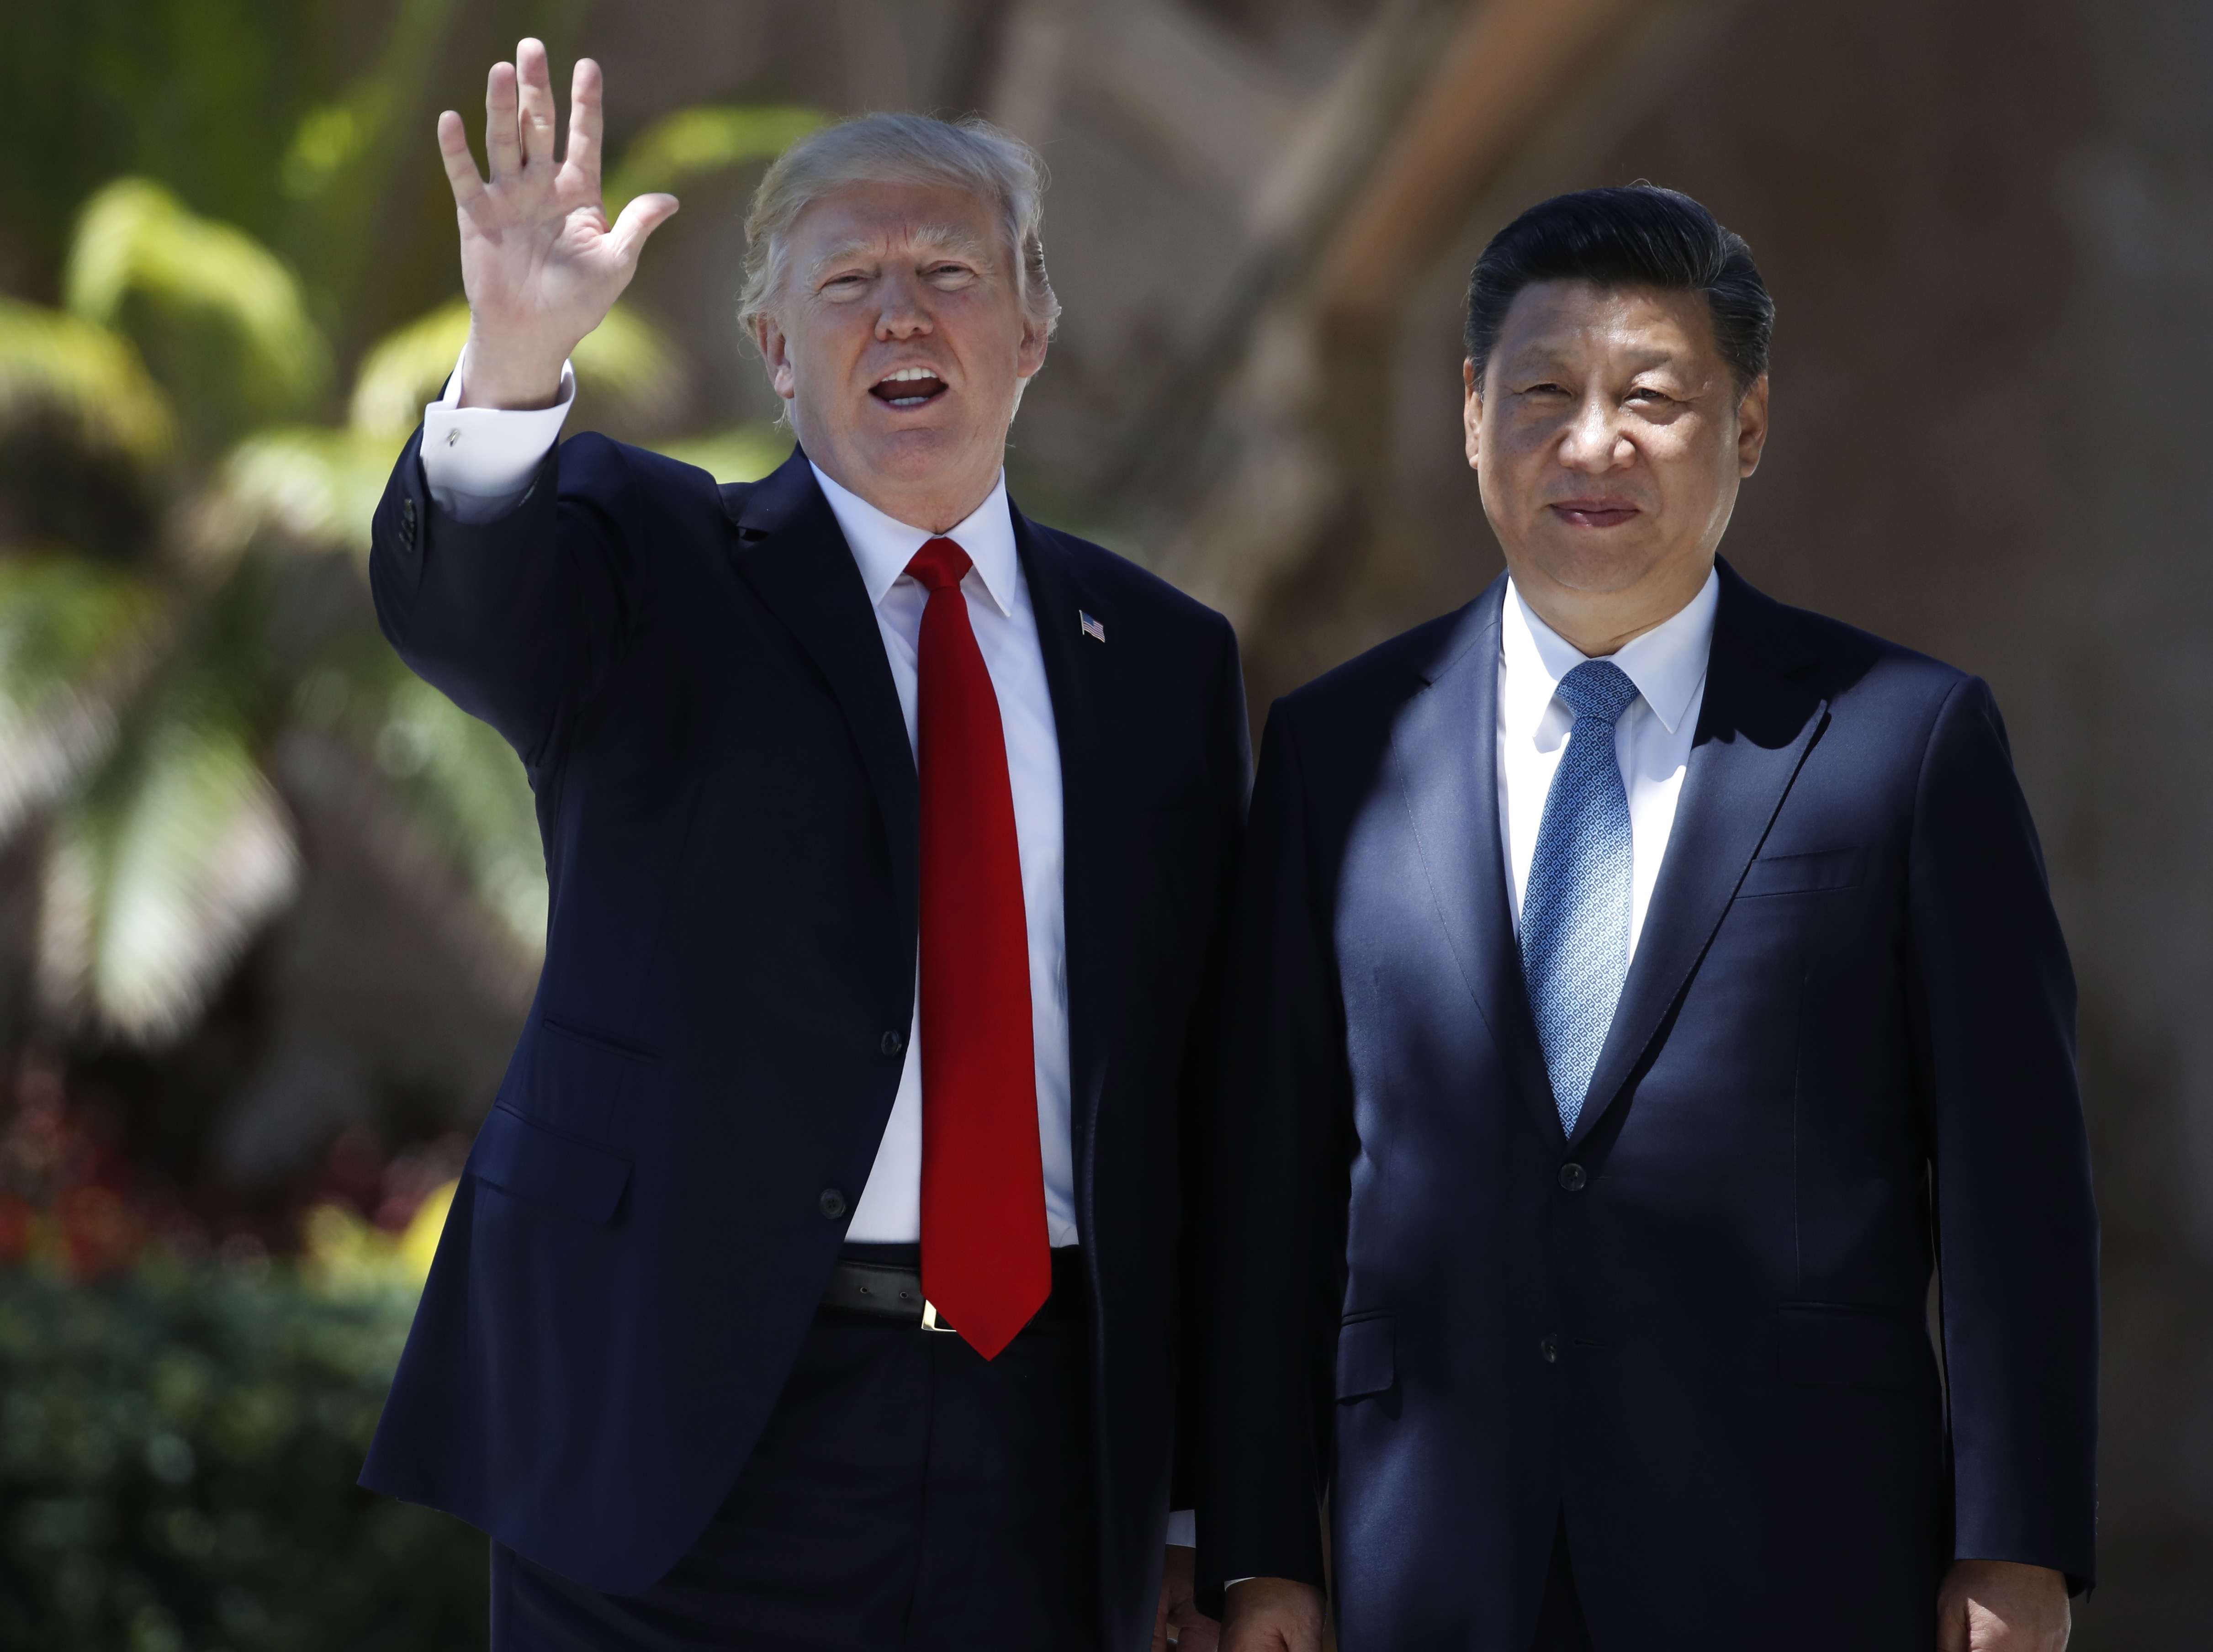 US President Donald Trump and China’s President Xi Jinping pause for photographs at Mar-a-Lago, in Palm Beach, Florida. File photo: AP